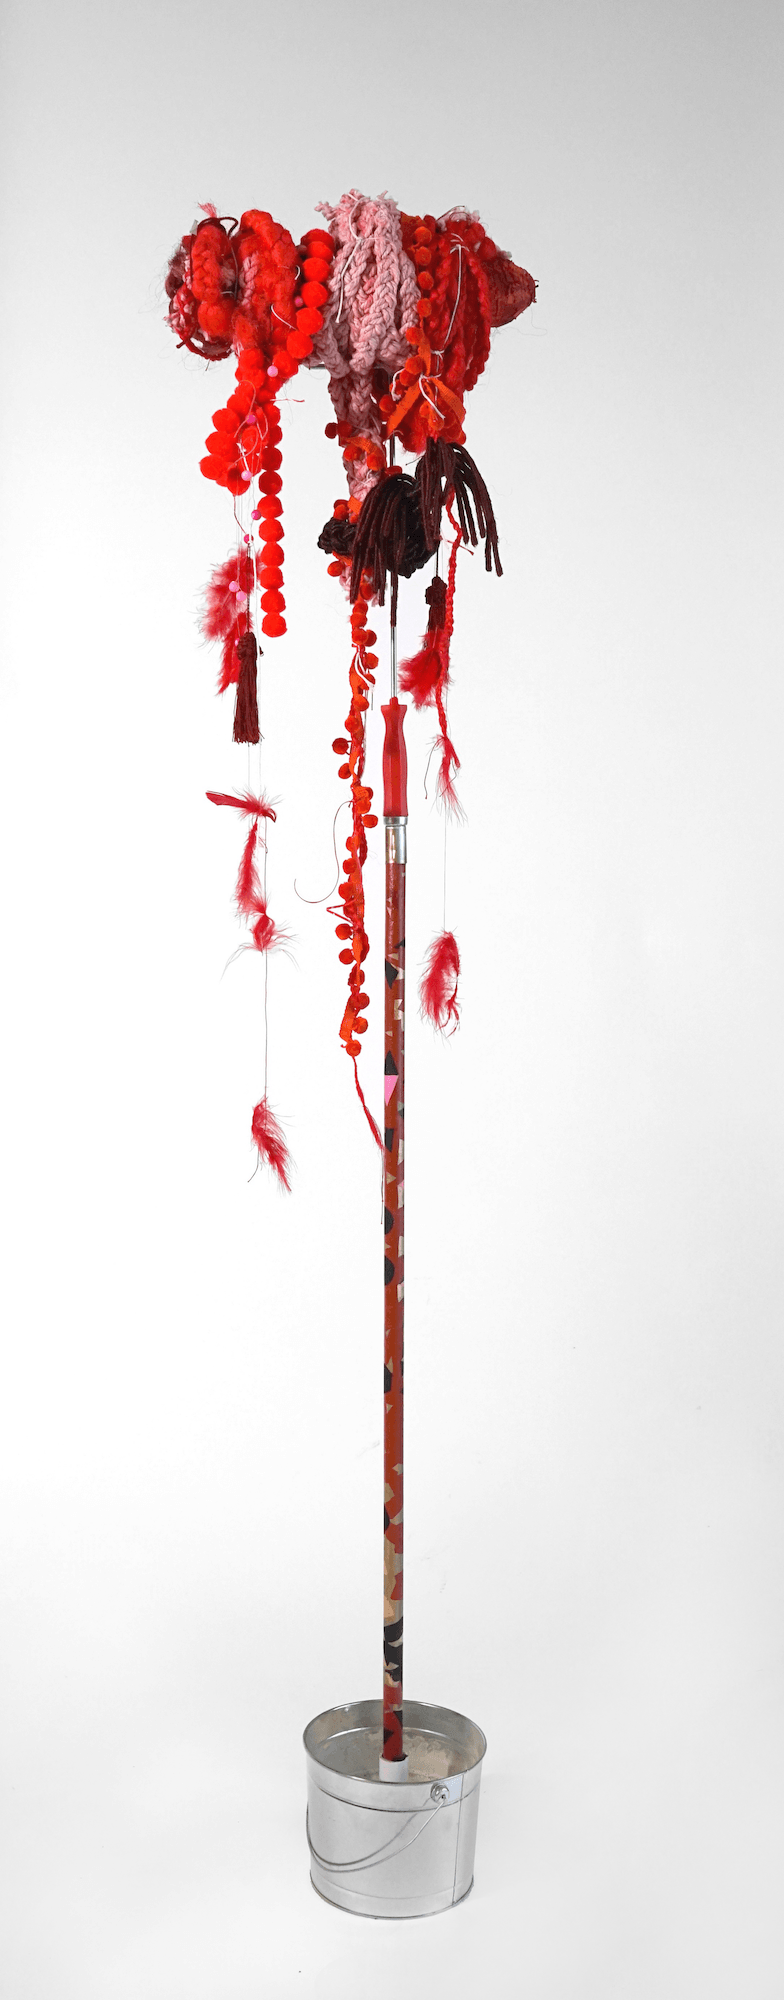  "Mop 3”, from the Series Whips, Whims and Wigs, 2019, Transformed mop head into a hairdo on &nbsp; decorated stick, various materials 